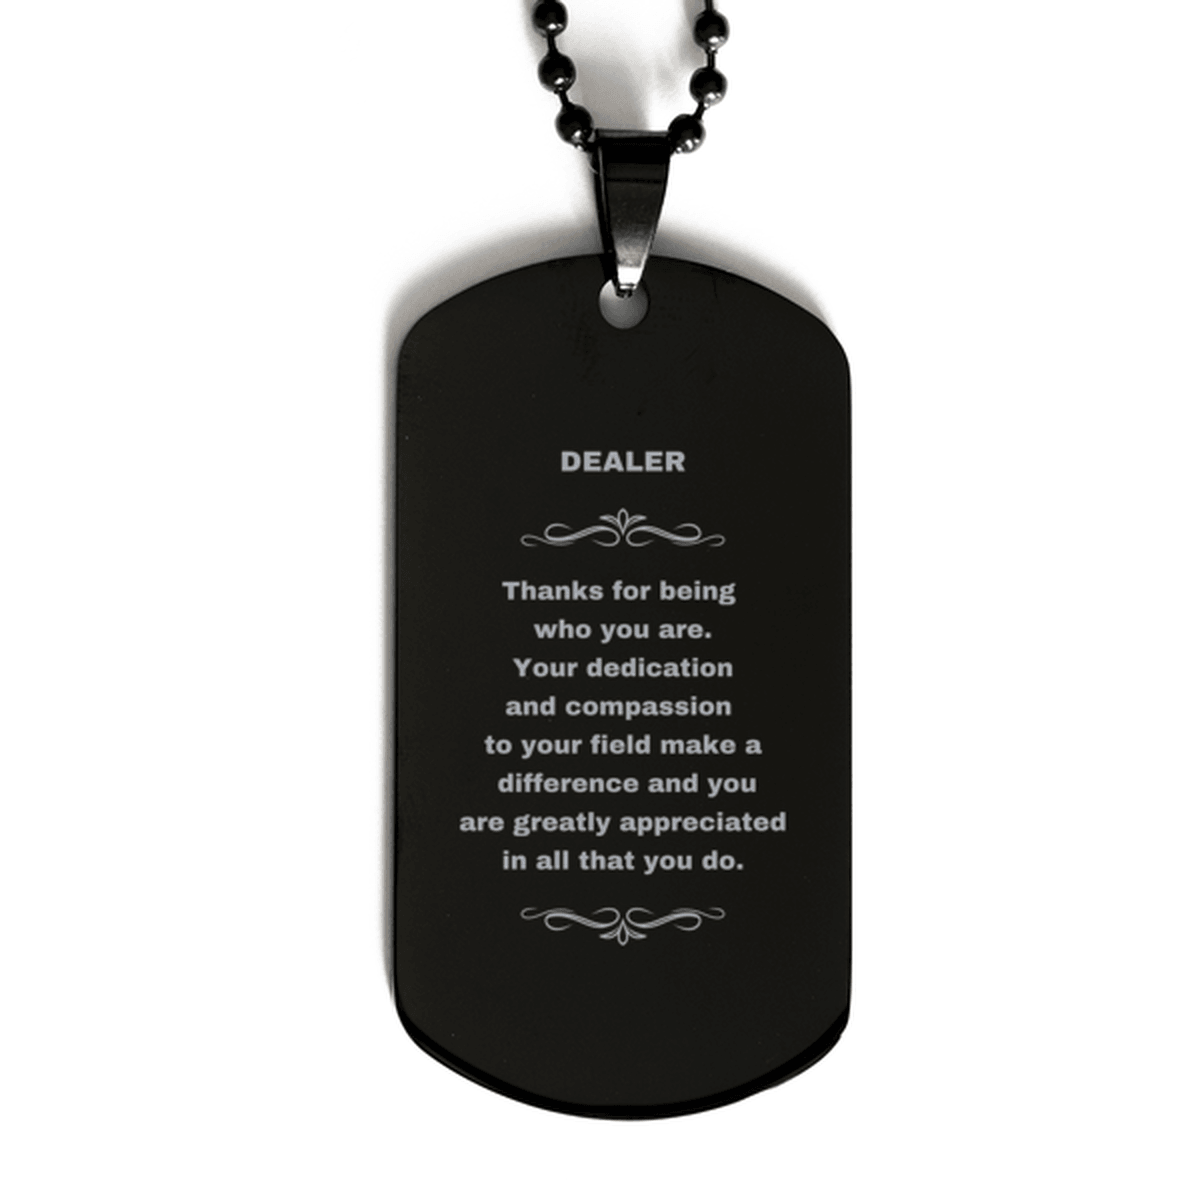 Dealer Black Dog Tag Necklace Engraved Bracelet - Thanks for being who you are - Birthday Christmas Jewelry Gifts Coworkers Colleague Boss - Mallard Moon Gift Shop